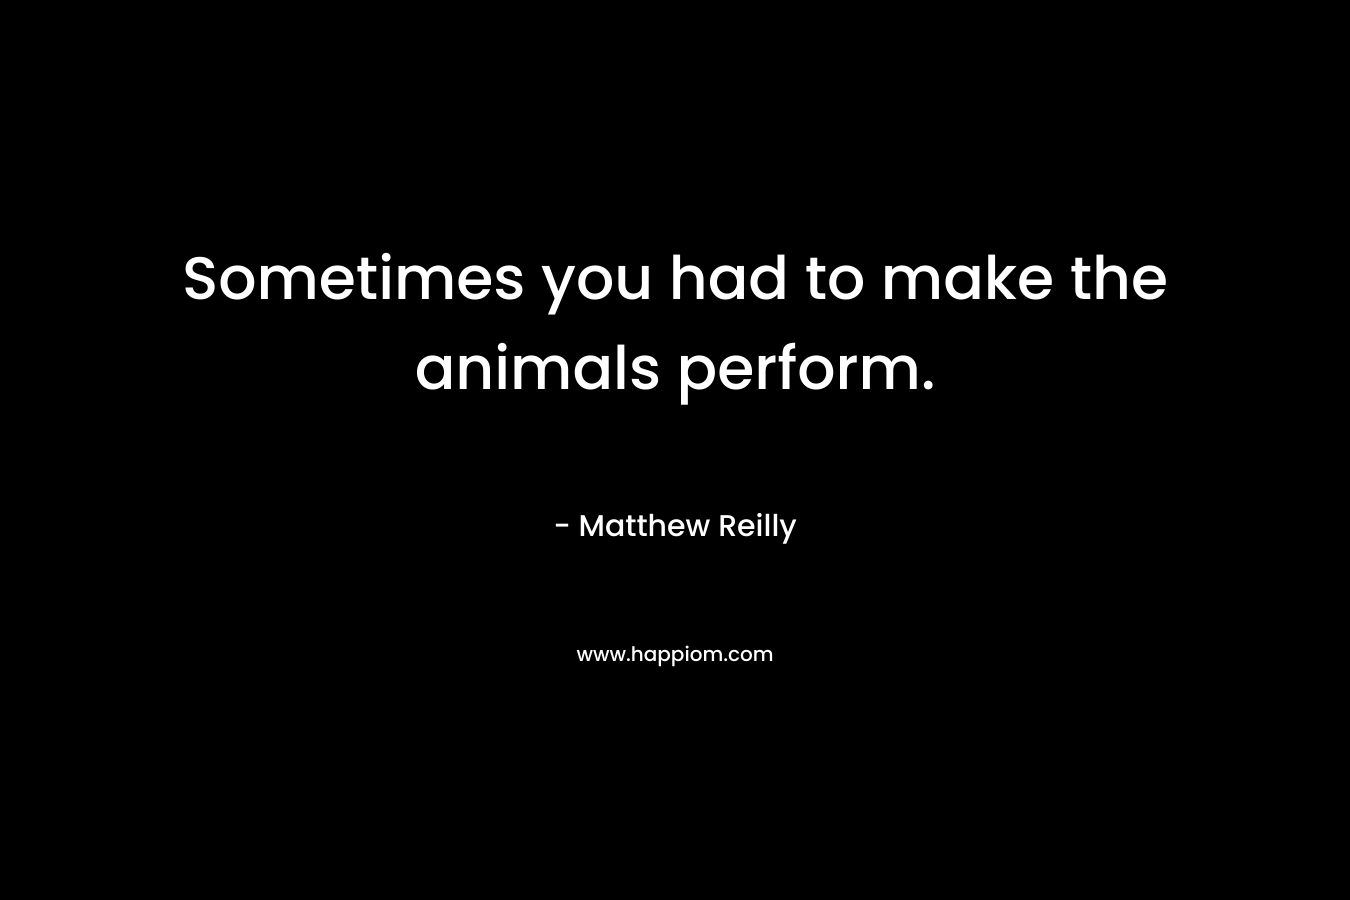 Sometimes you had to make the animals perform. – Matthew Reilly